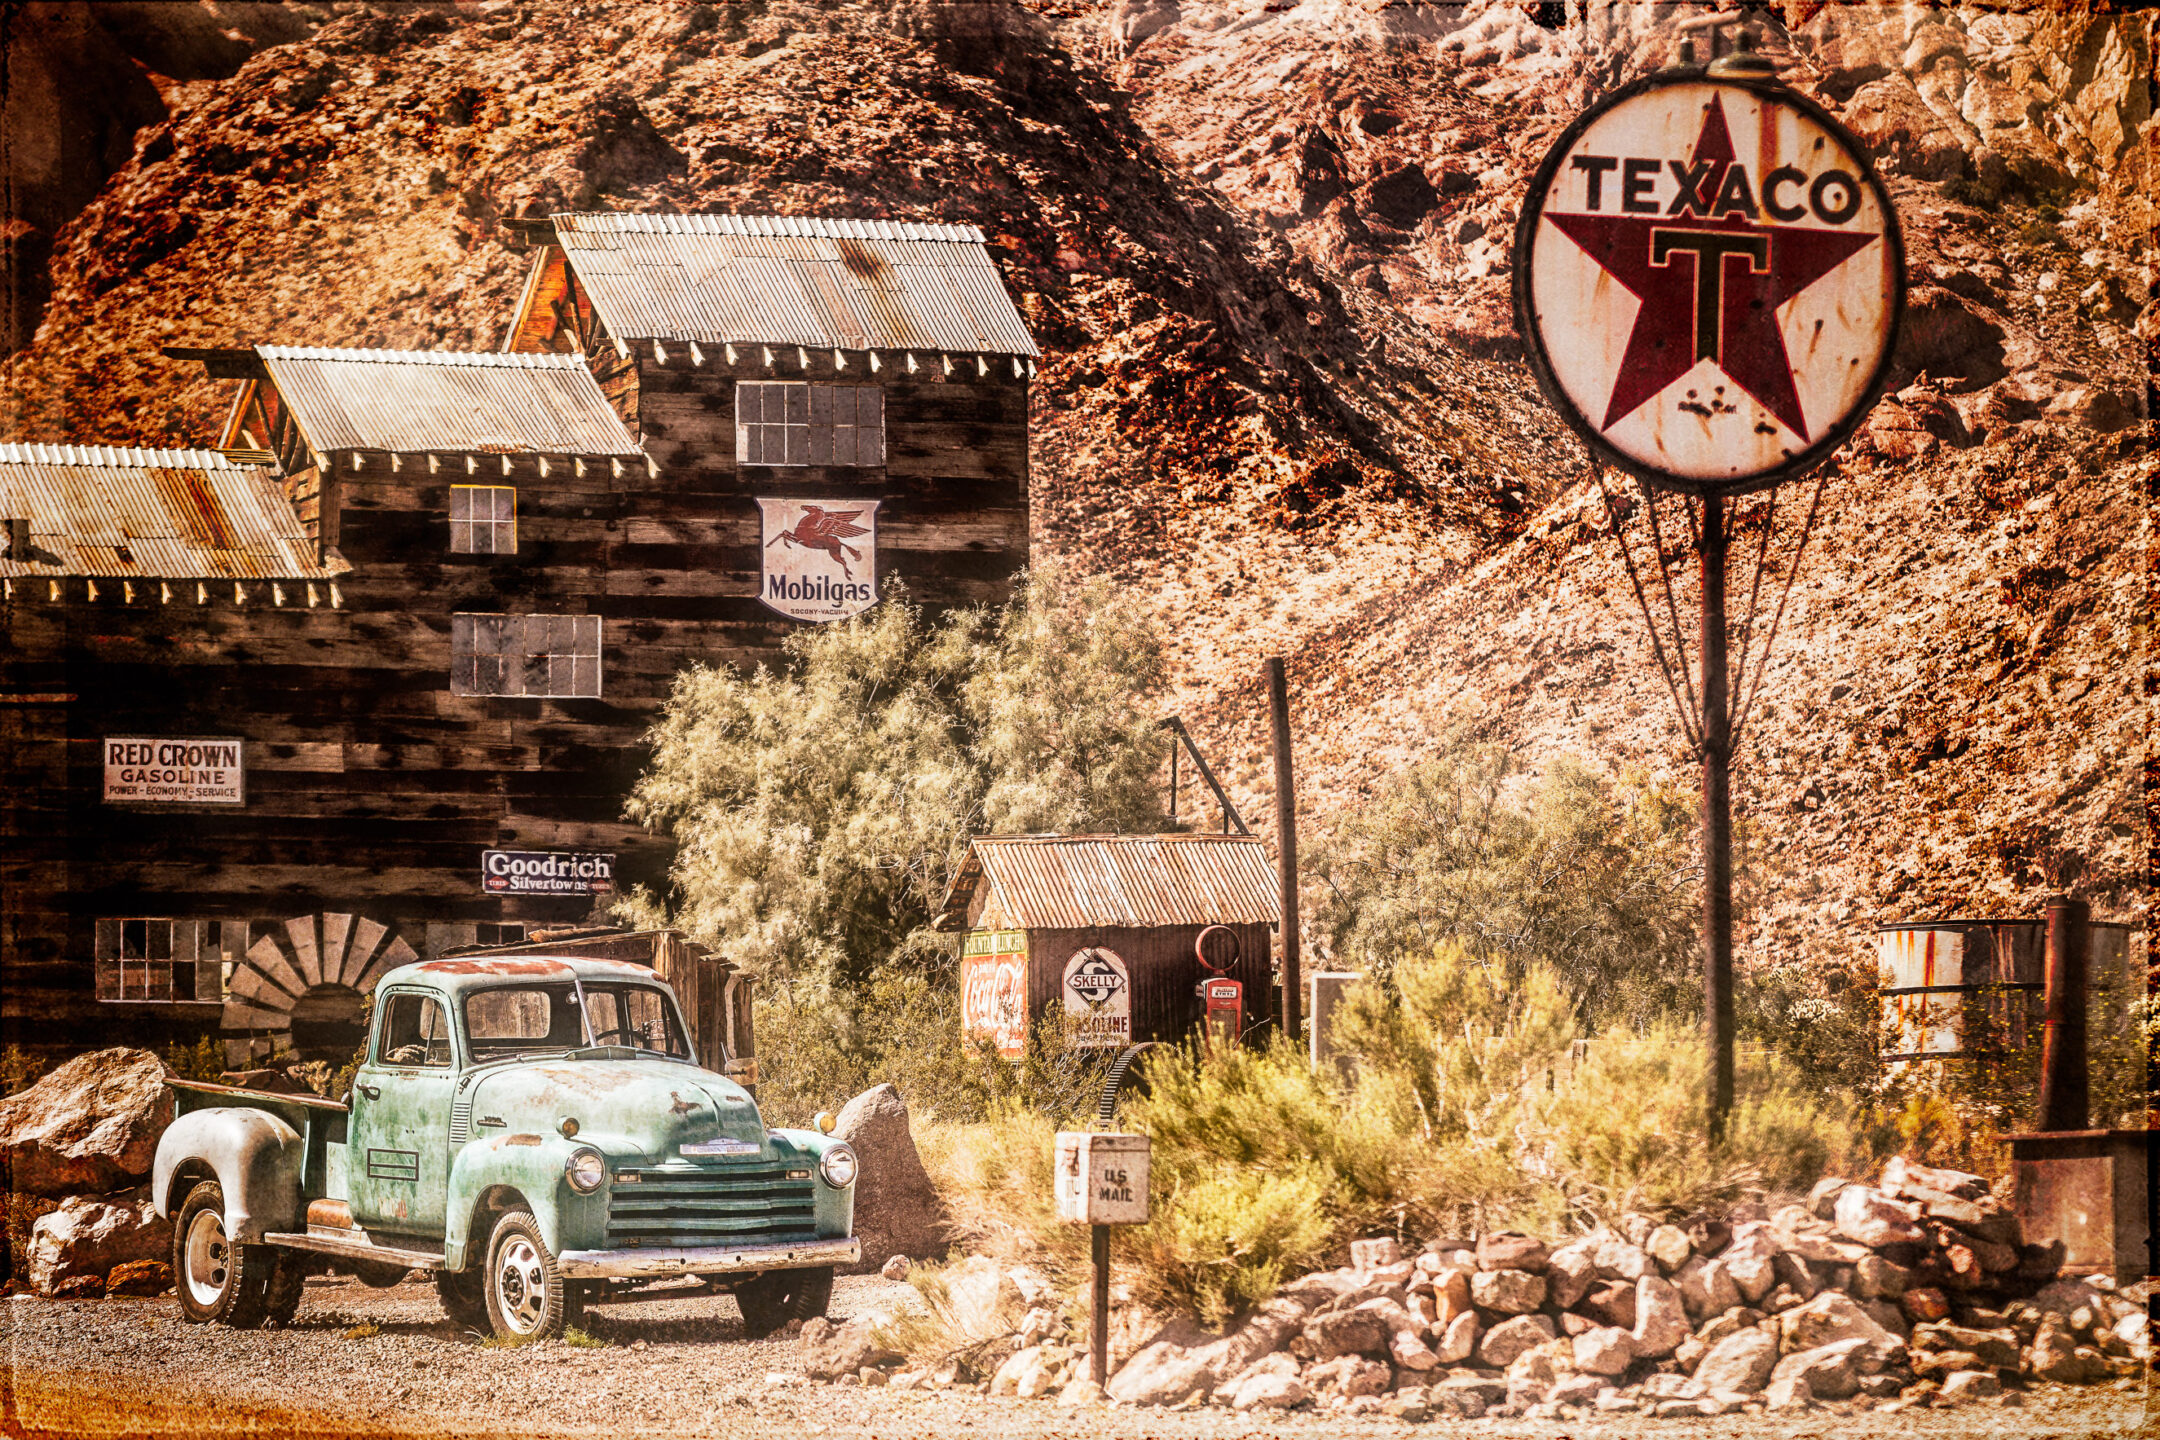 330Collection Techatticup gold mine ghost town antique car junkyard near vegas for Touring